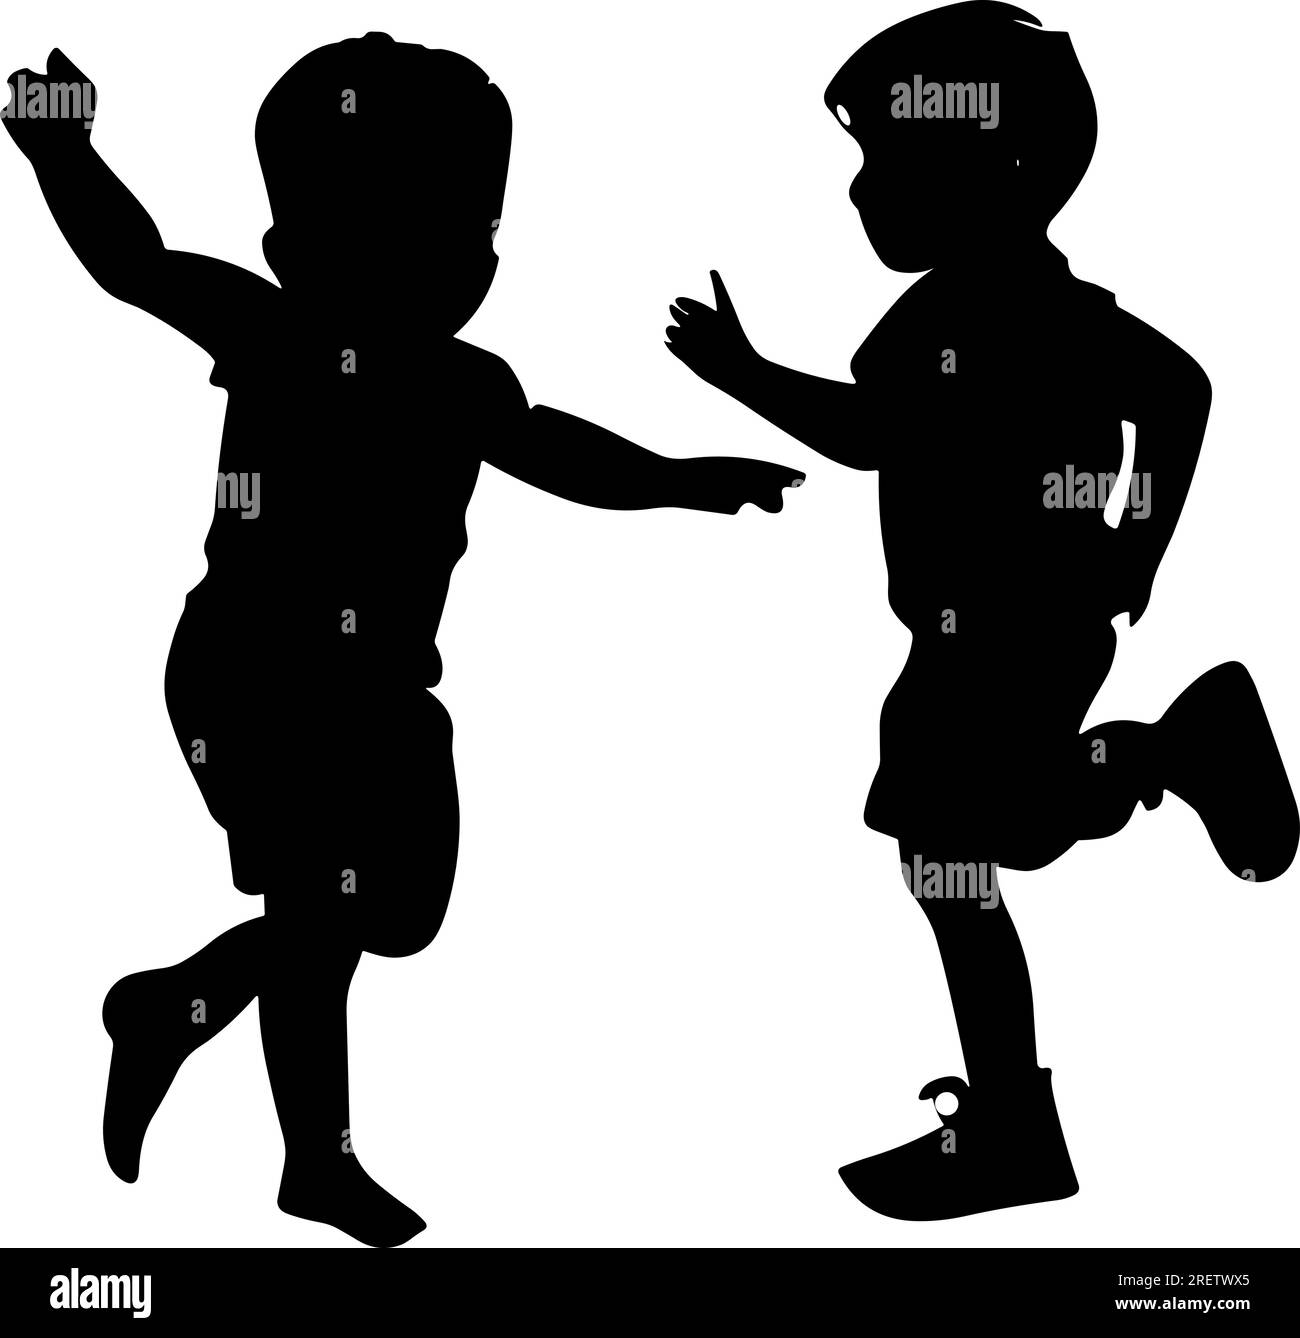 Two boys are dancing with joy and energy, showing off their moves and skills. They are having fun and expressing themselves through music and rhythm Stock Vector